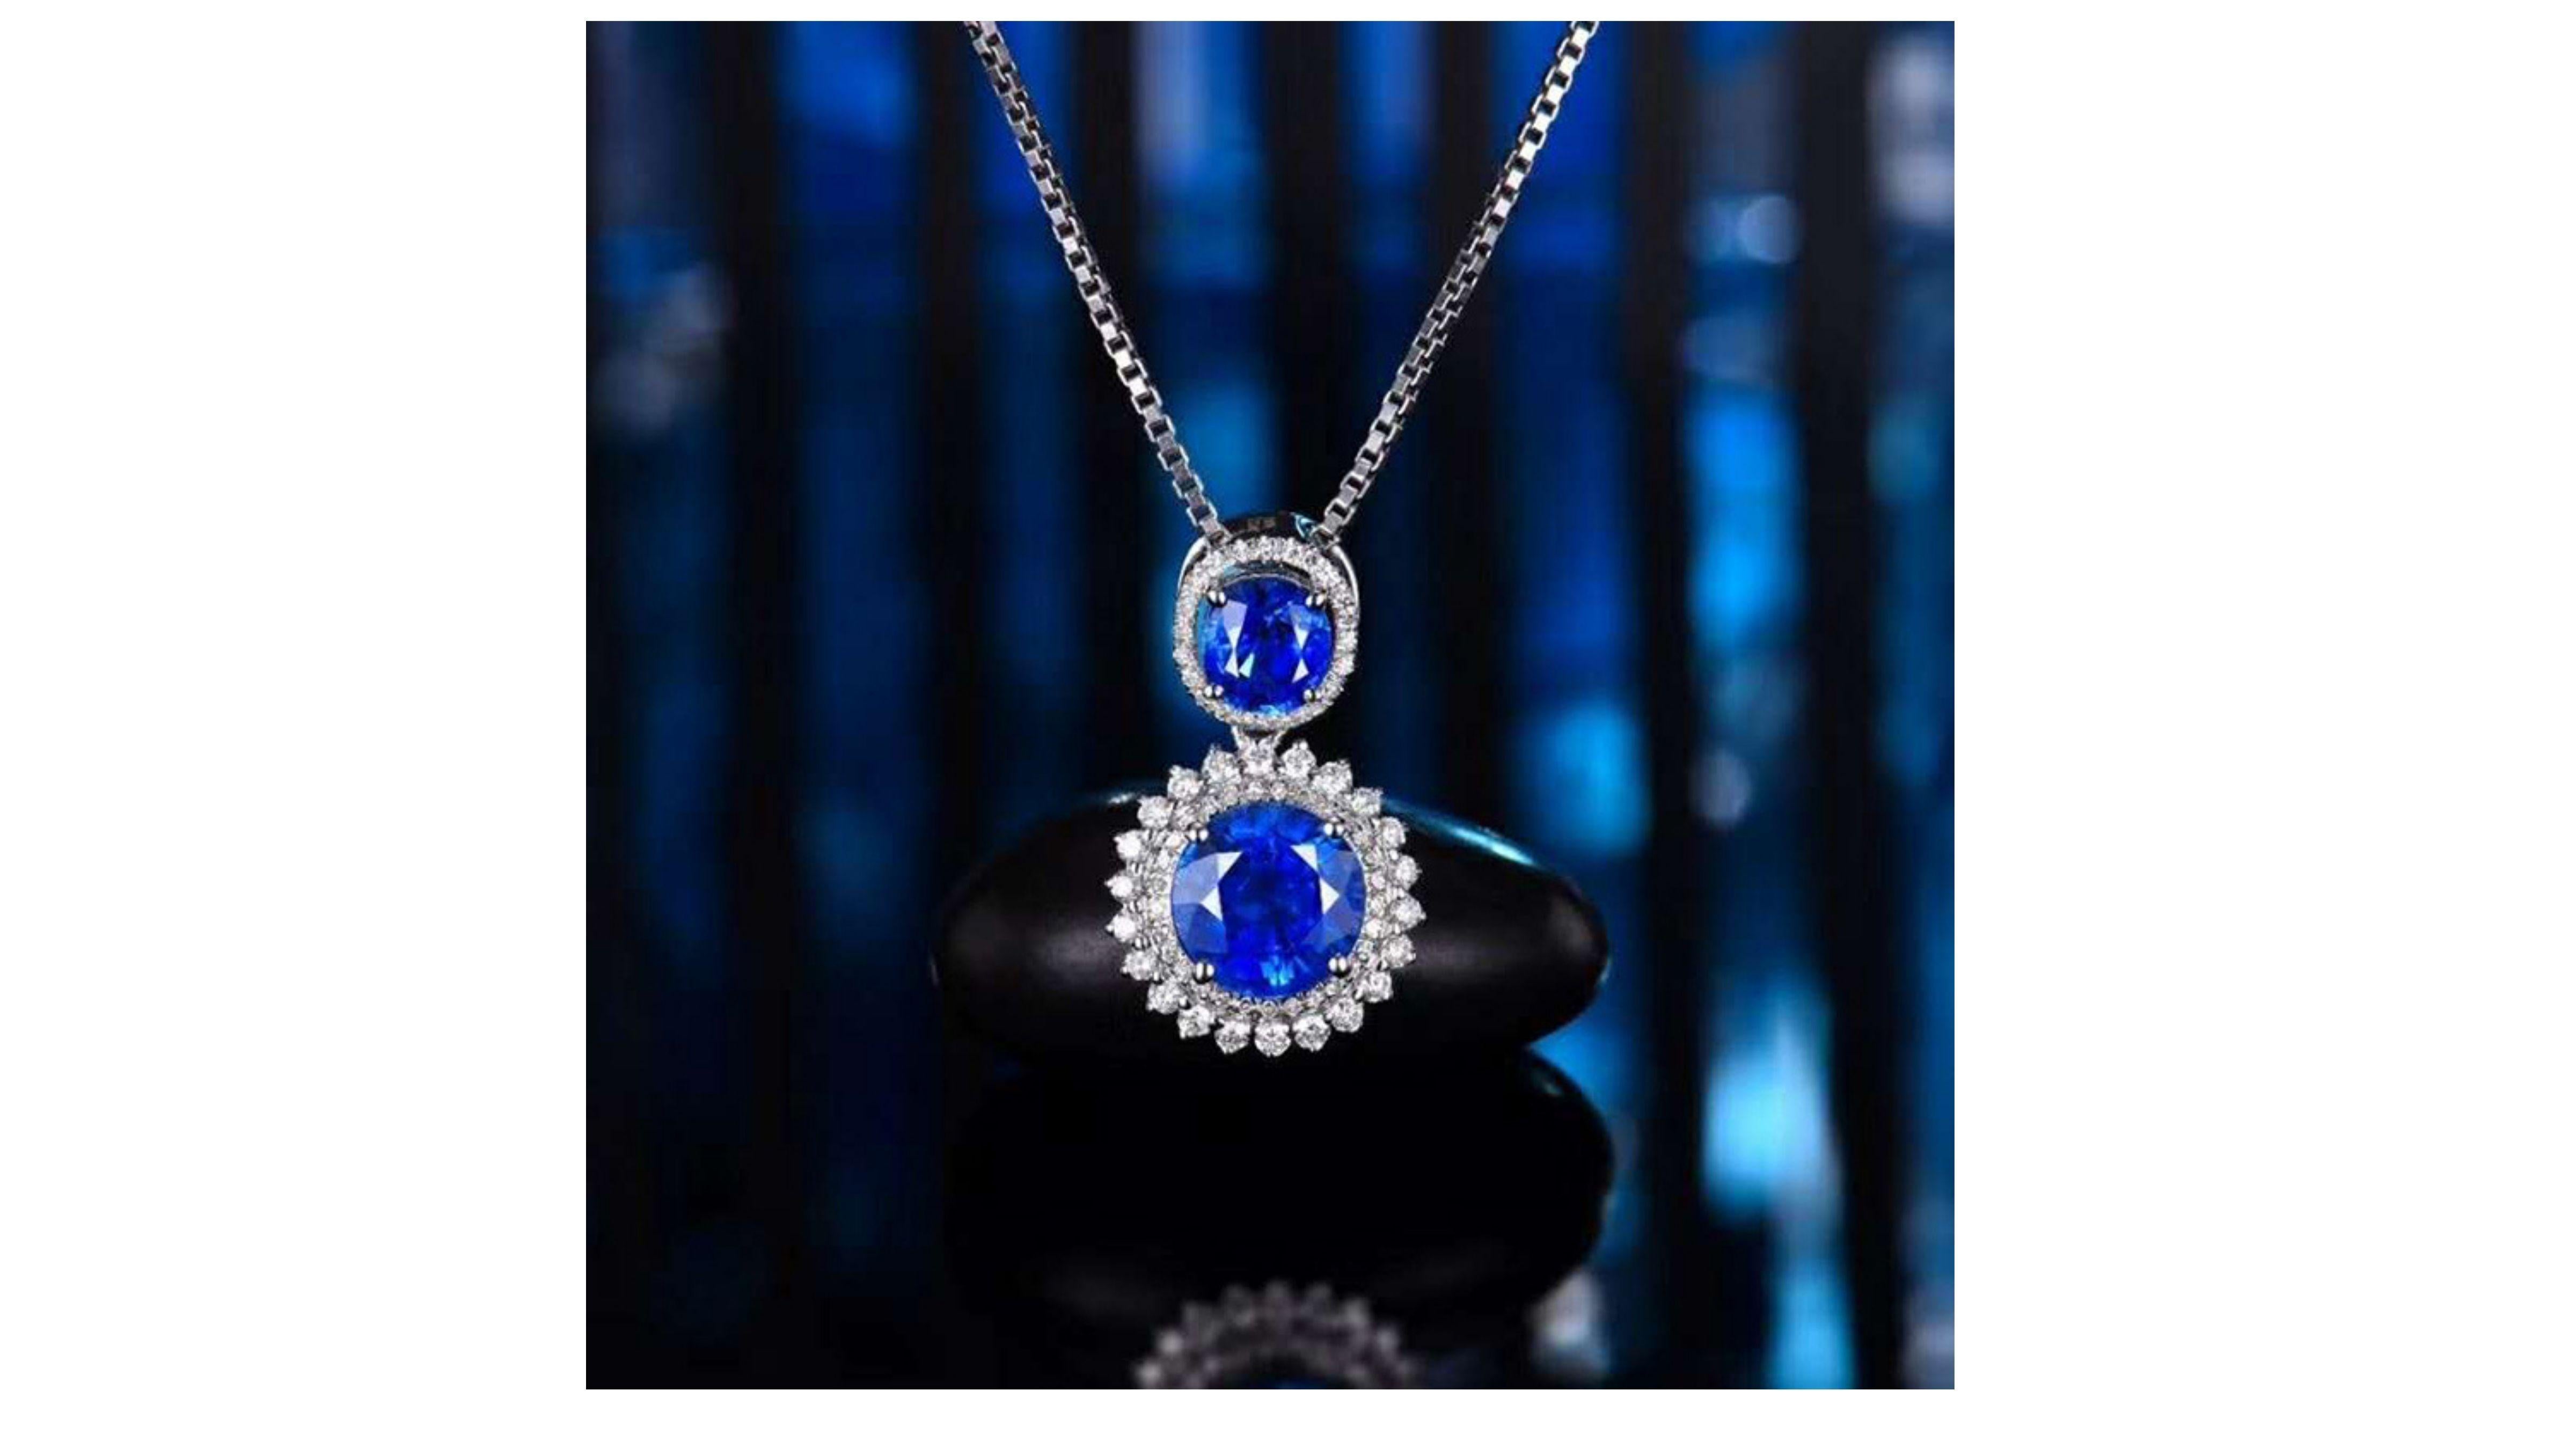 

This 3.67 Carat Sri Lanka  Blue Sapphire Diamond Necklace 18k White Gold really does stand out with 85 diamonds  inc larger ones and smaller diamonds around the main stone

 Ceylon Sapphires. ... The blue sapphires from Sri Lanka, now referred to